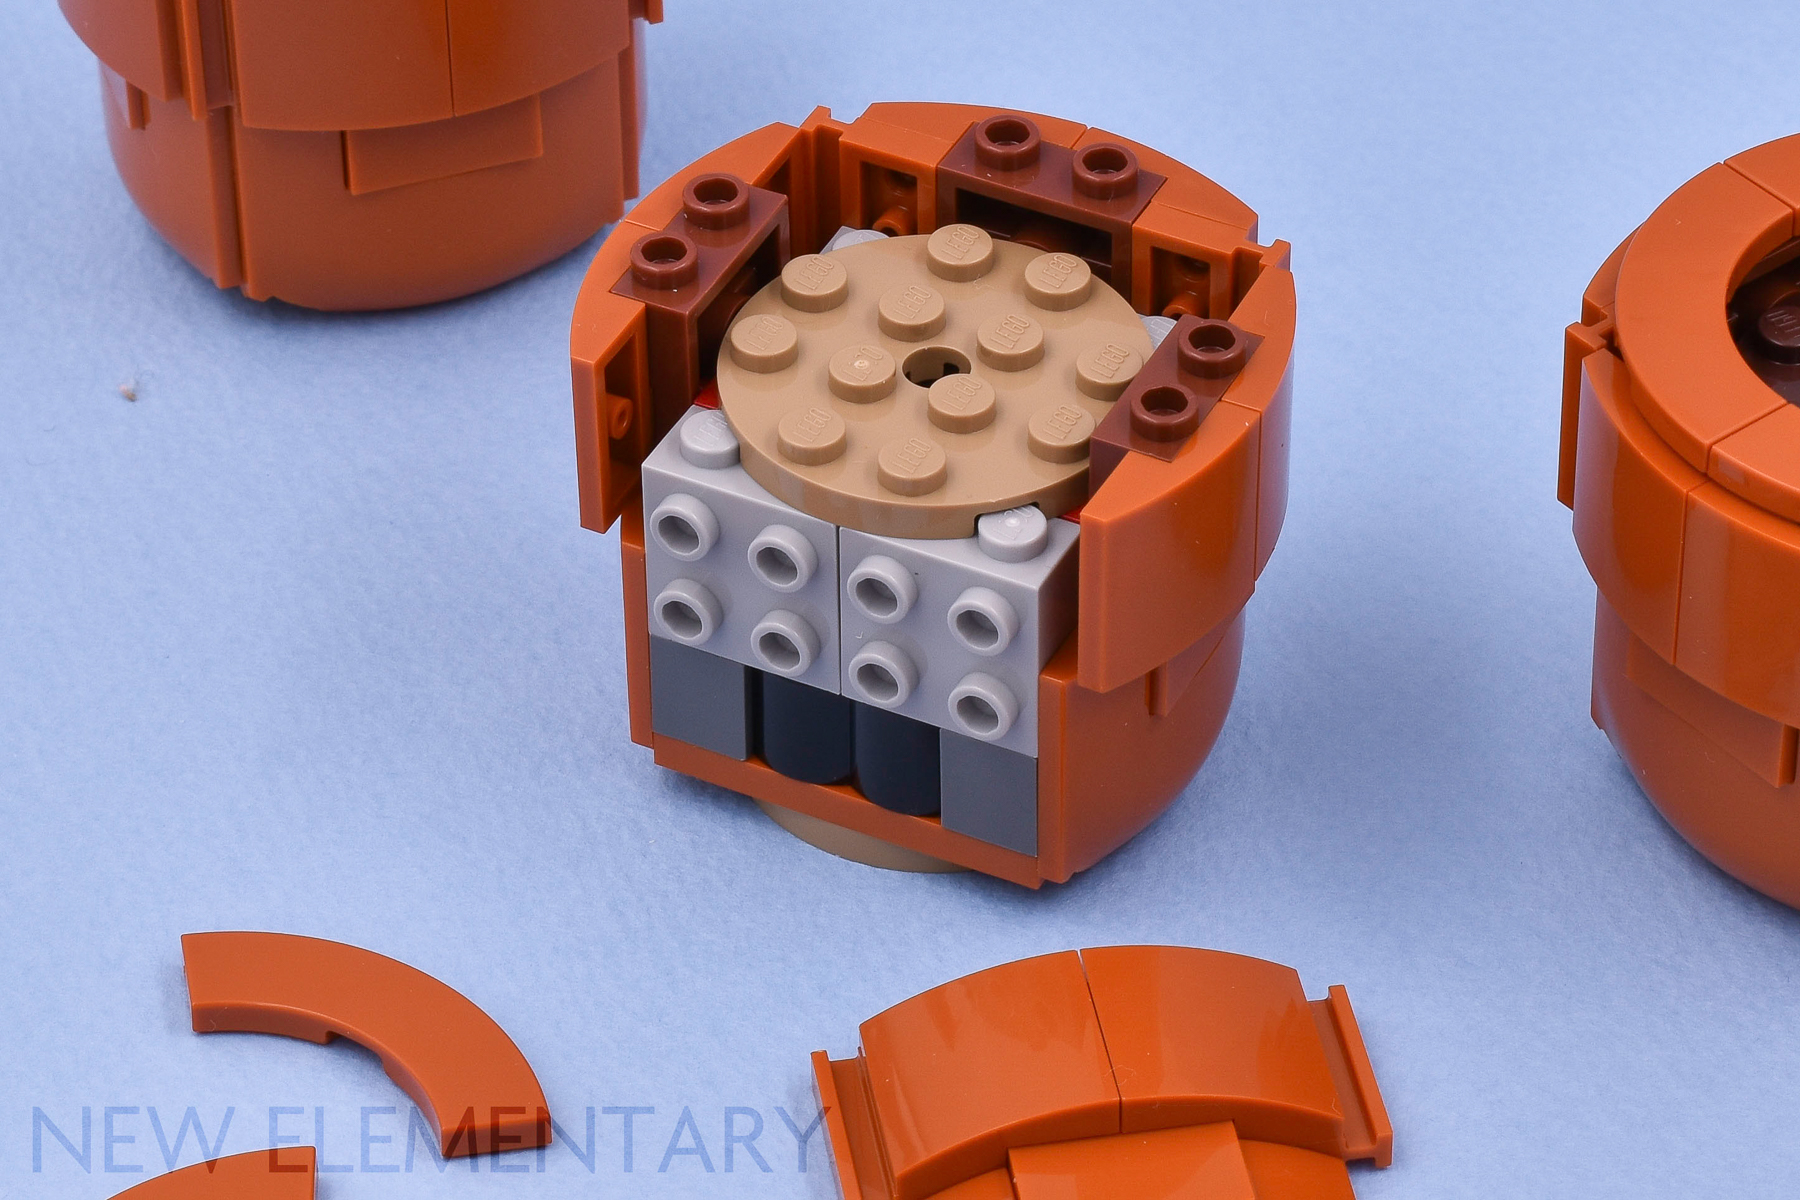 LEGO® ICONS™ review + MOC: 10329 Tiny Plants  New Elementary: LEGO® parts,  sets and techniques